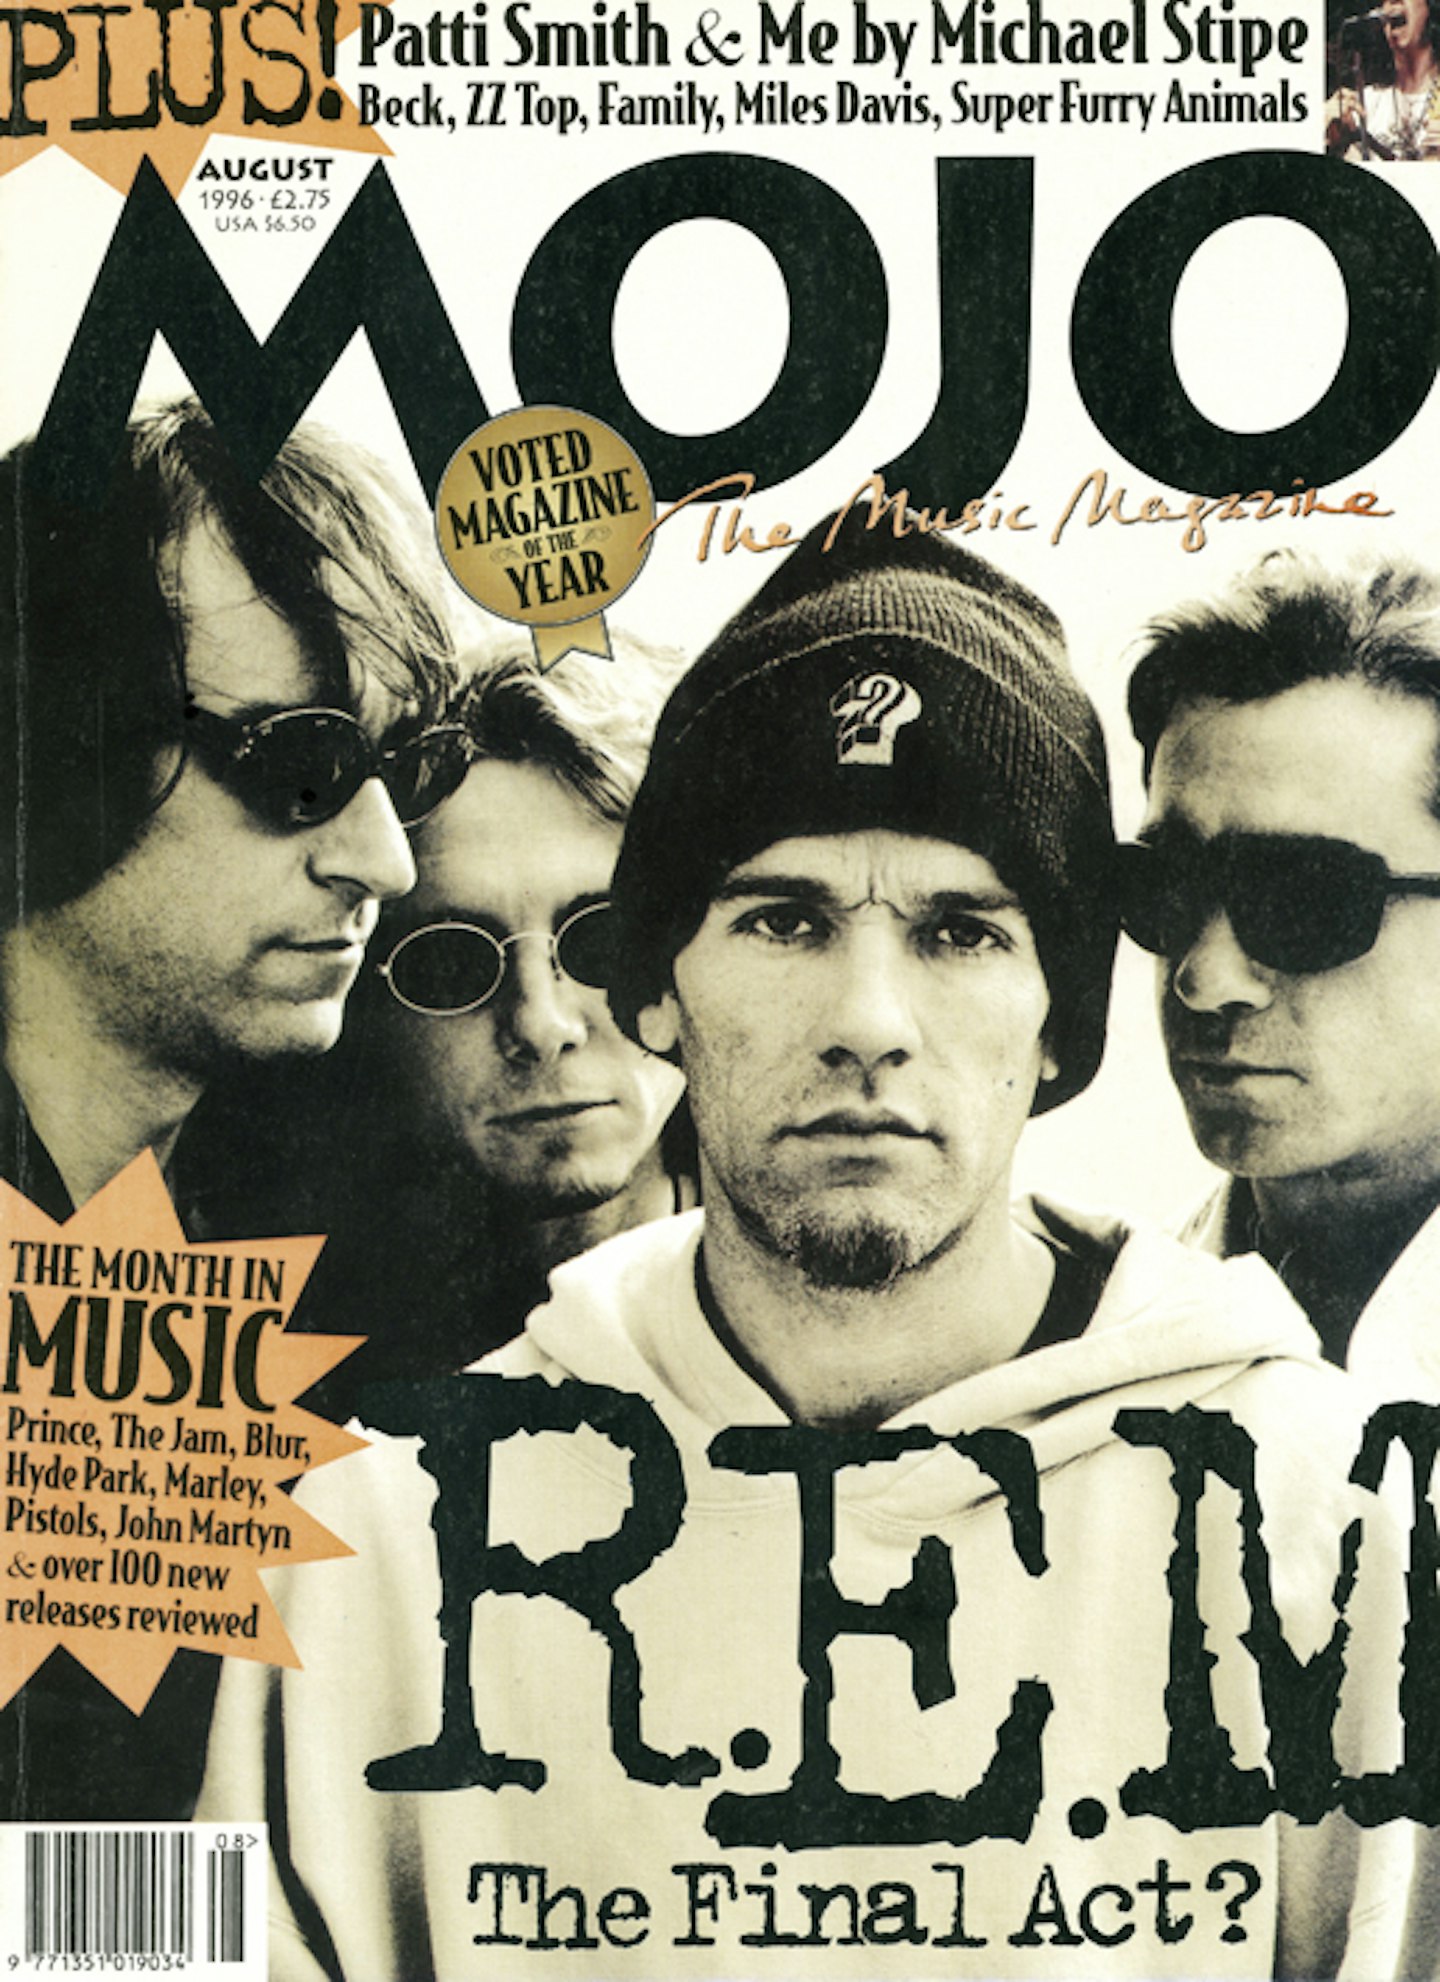 MOJO Issue 33 / August 1996